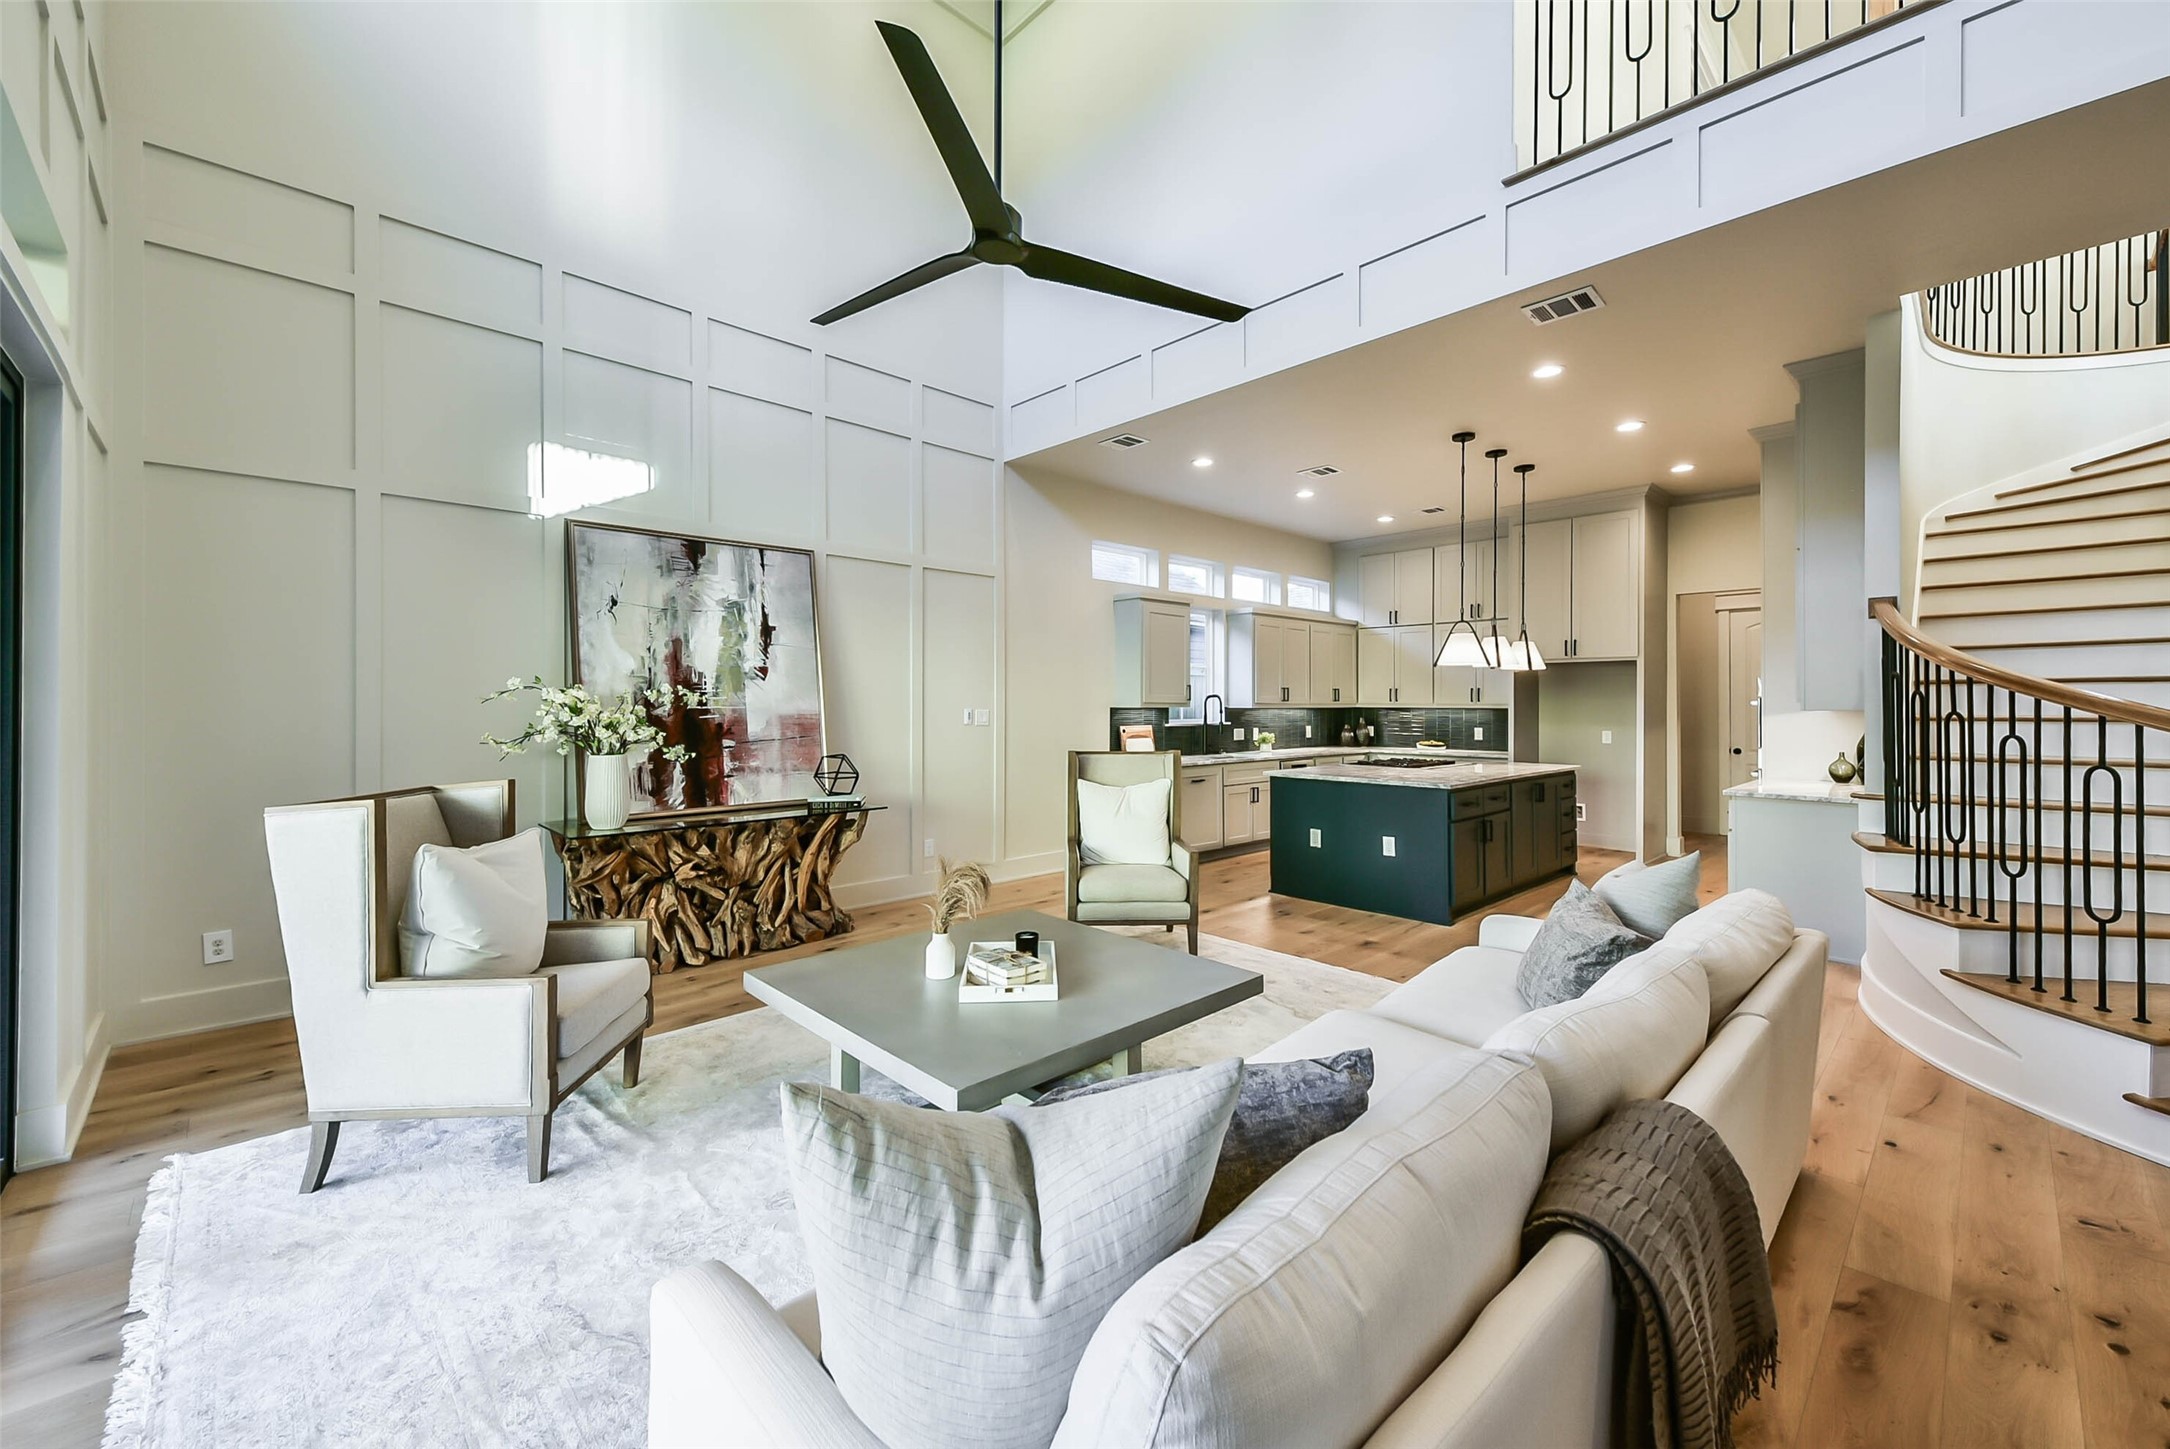 The great room is open to the kitchen and features two story ceilings, wainscoted walls custom wrought iron railings from the balcony above and high windows creating a light and bright atmosphere throughout the first floor.